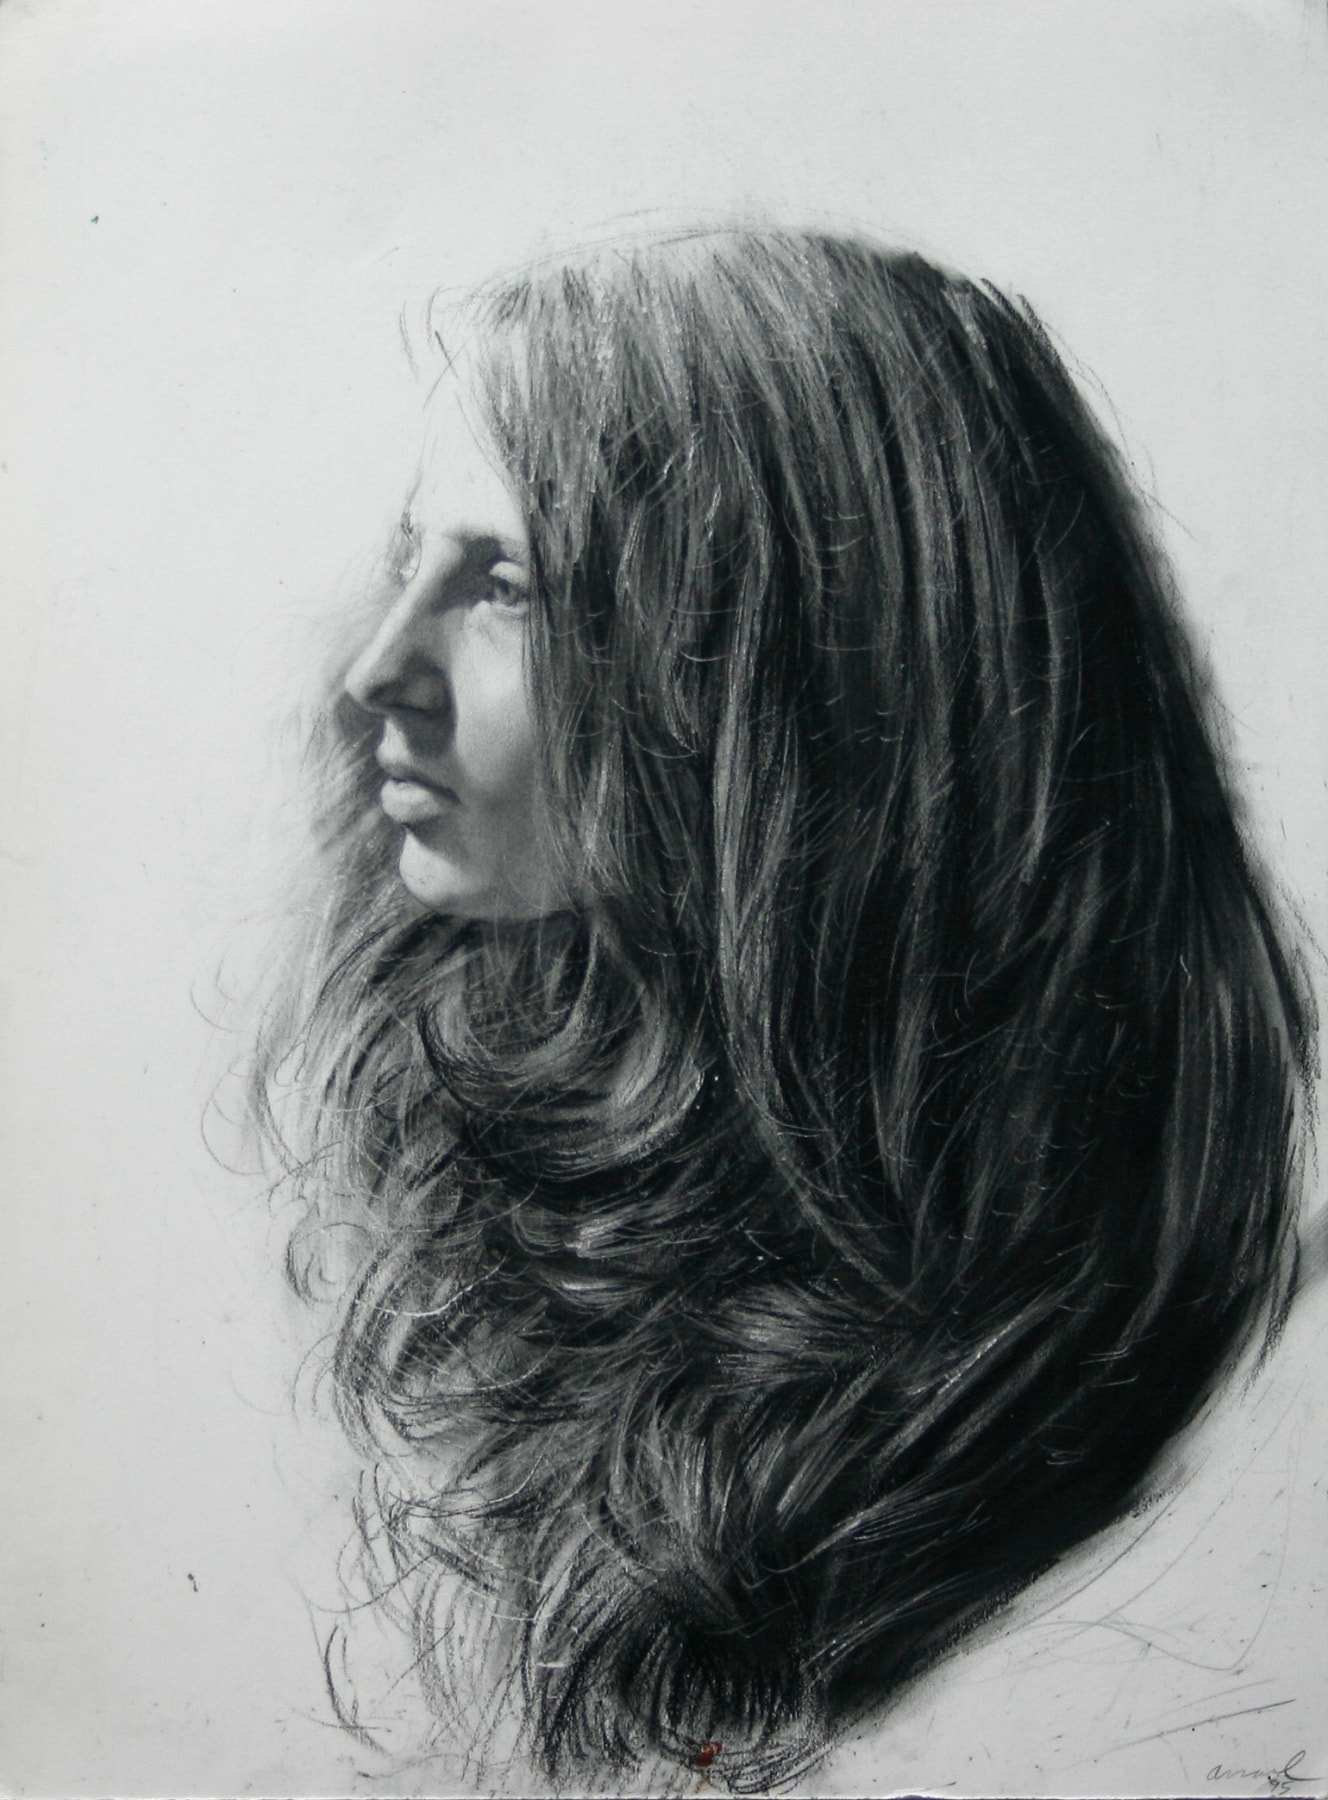 Steven Assael, Girl in Profile (SOLD), 1995, crayon and graphite on paper, 14 1/8 x 10 3/8 inches